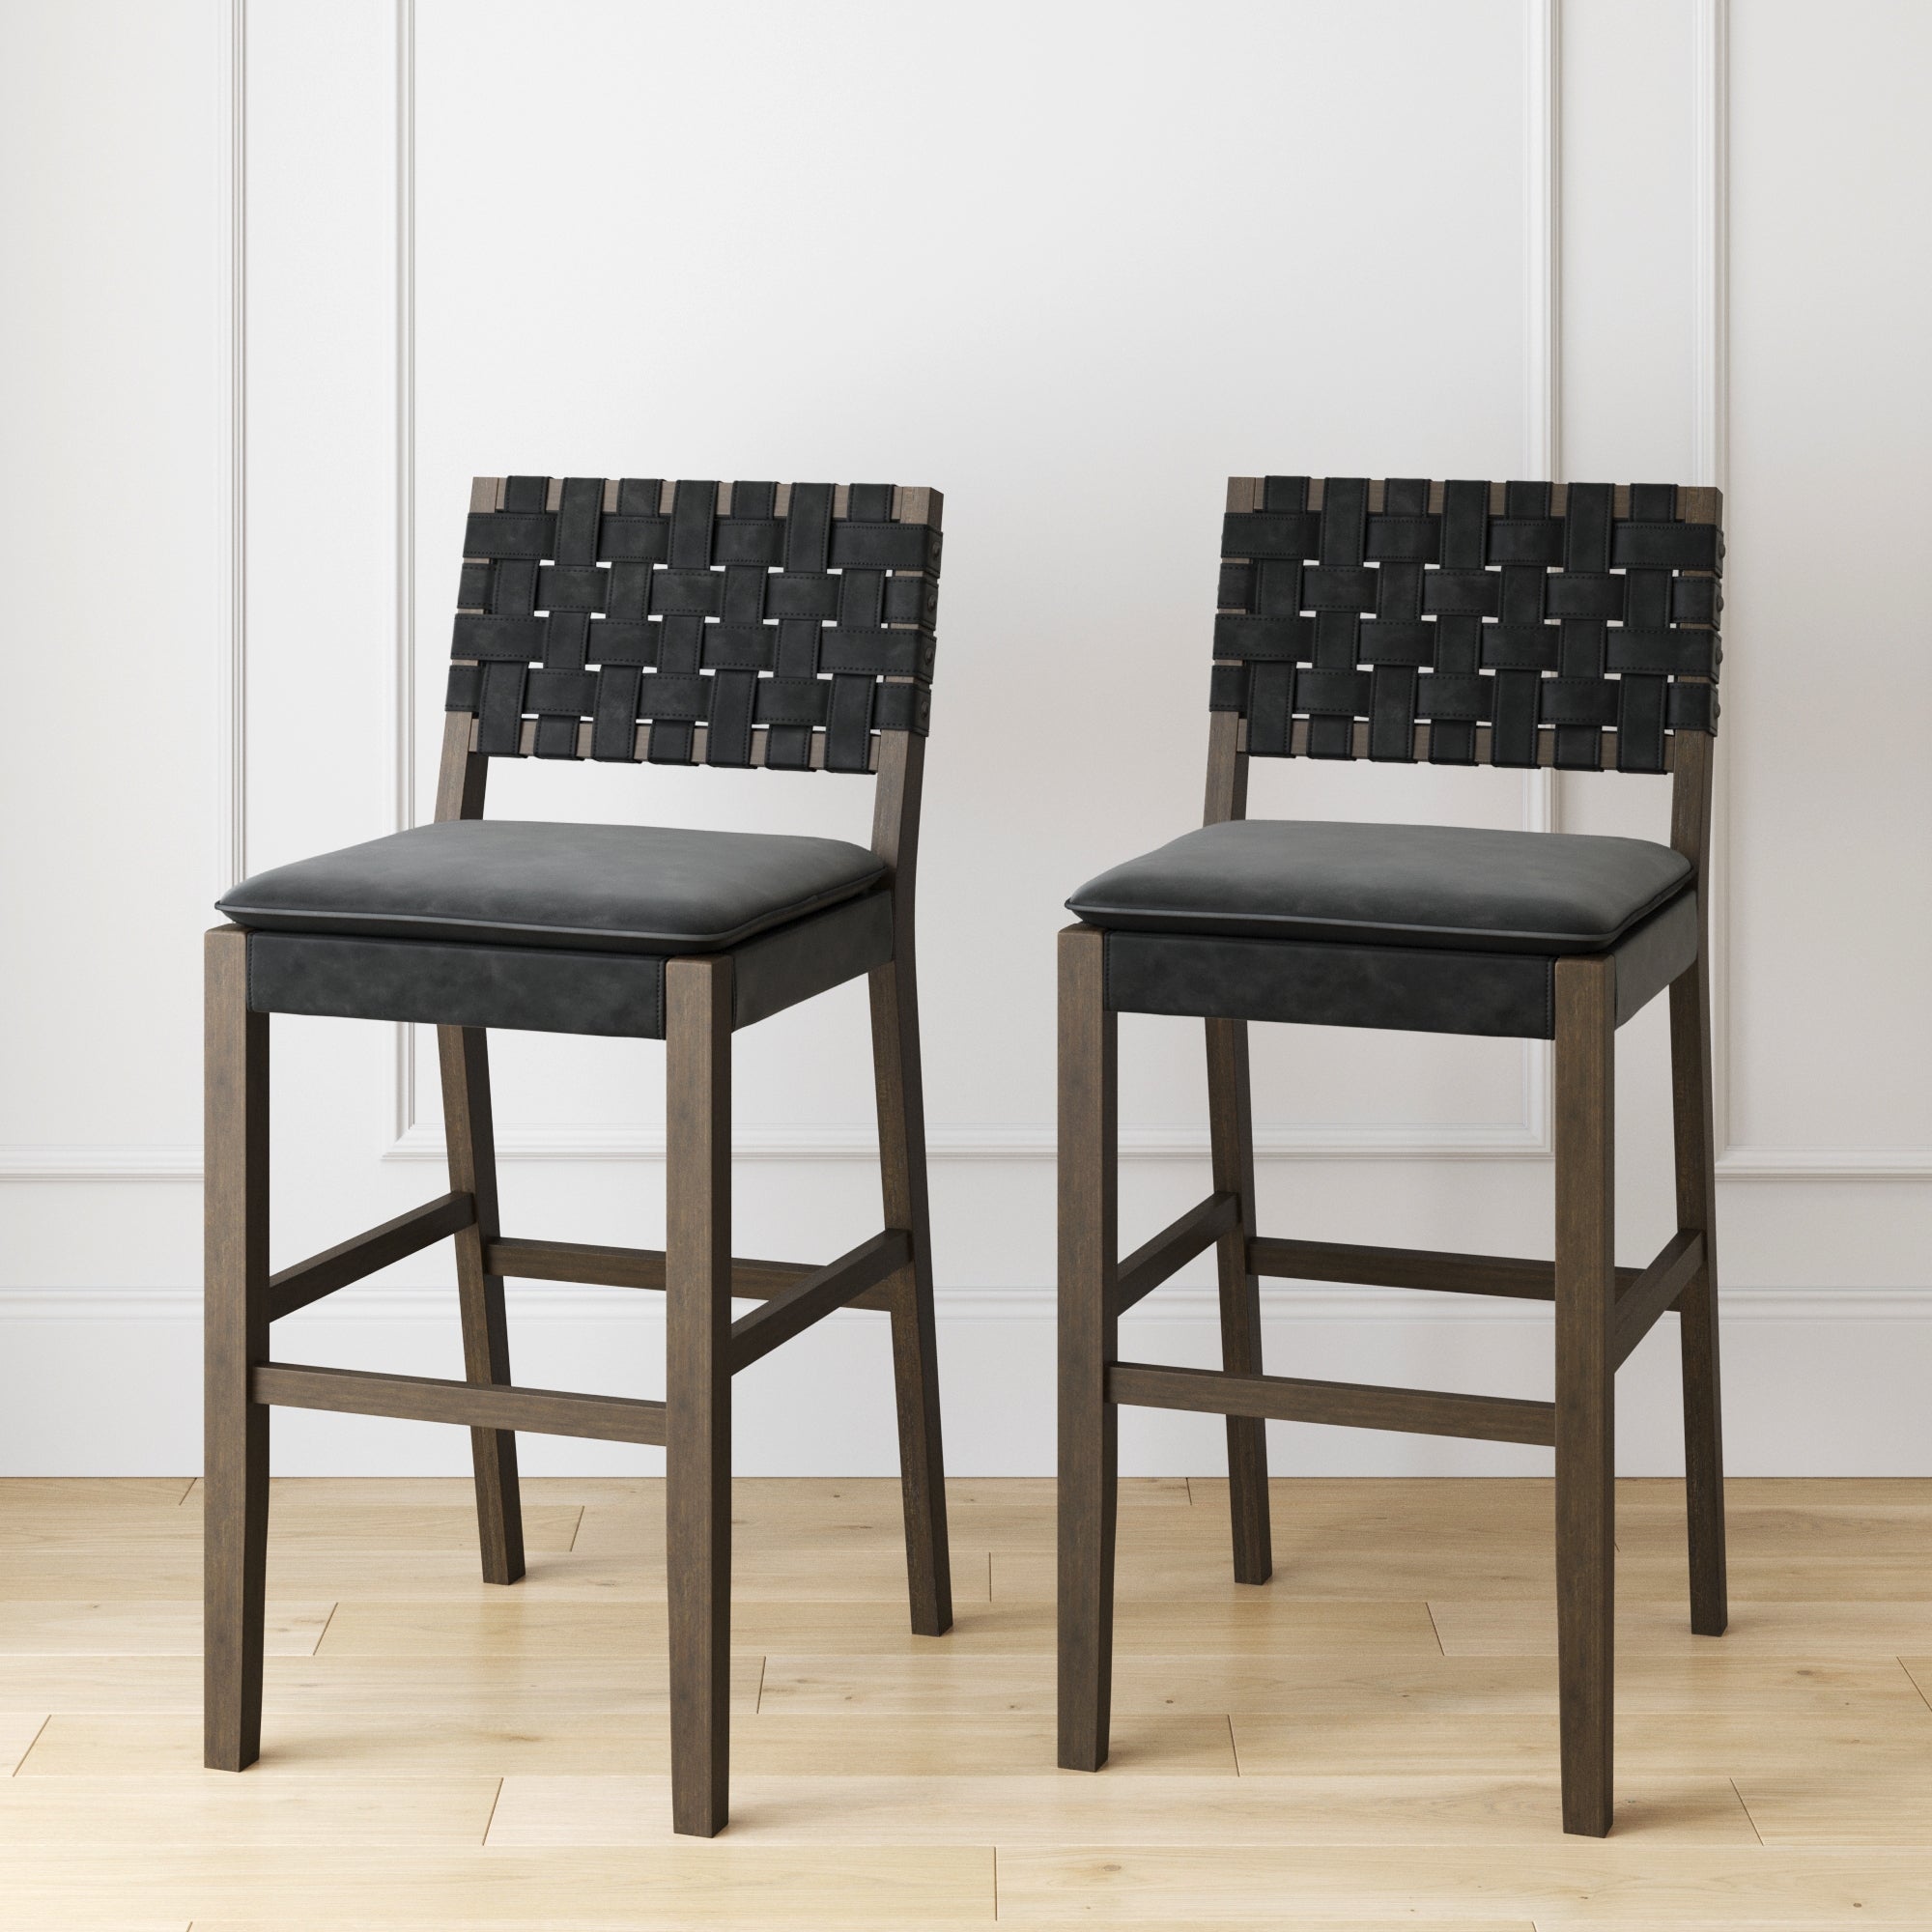 Set of 2 Faux Leather Woven Bar Stools Black